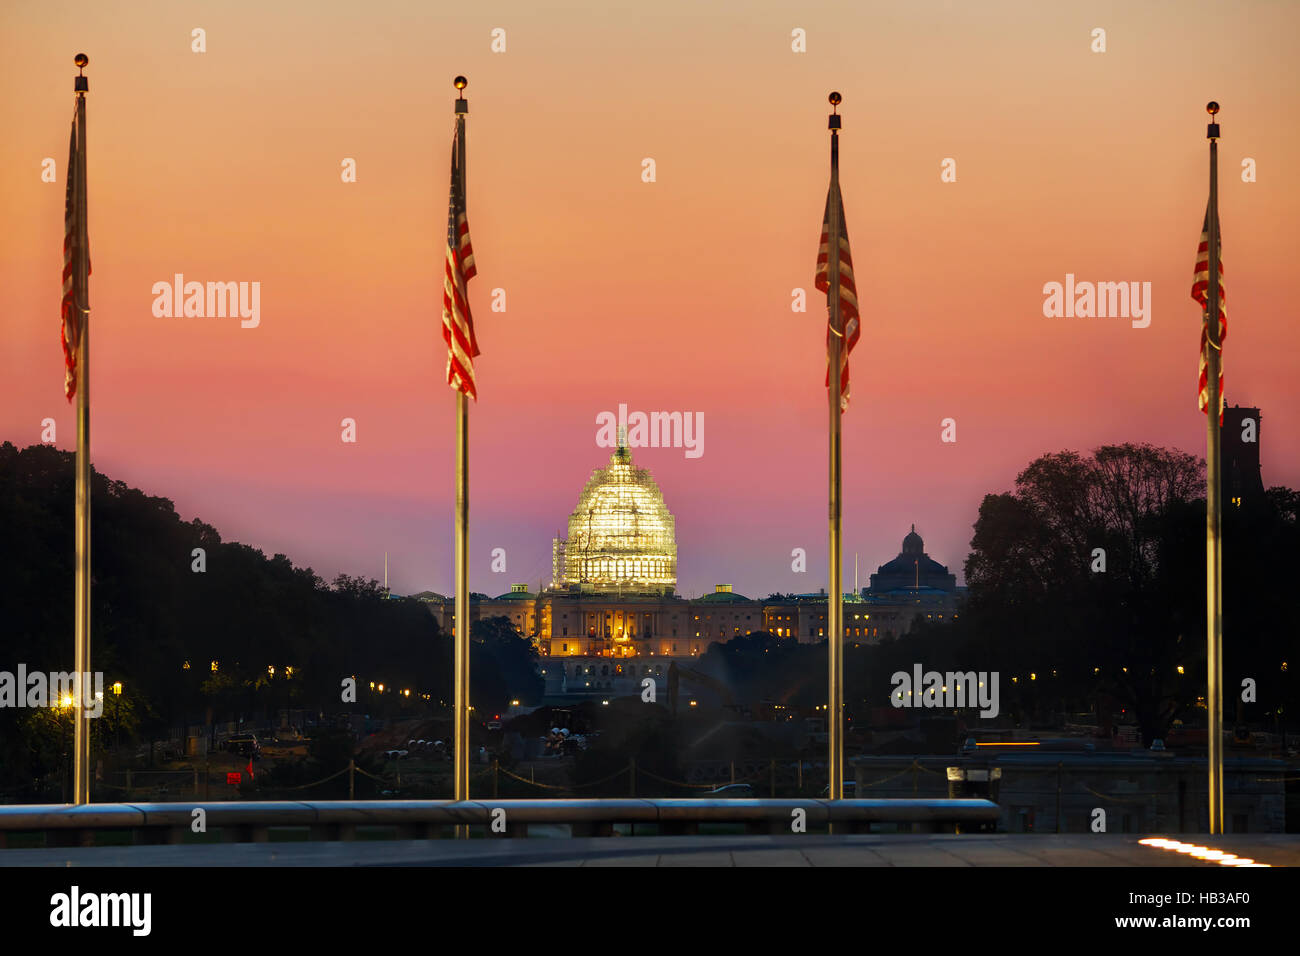 State Capitol building in Washington, DC Stock Photo